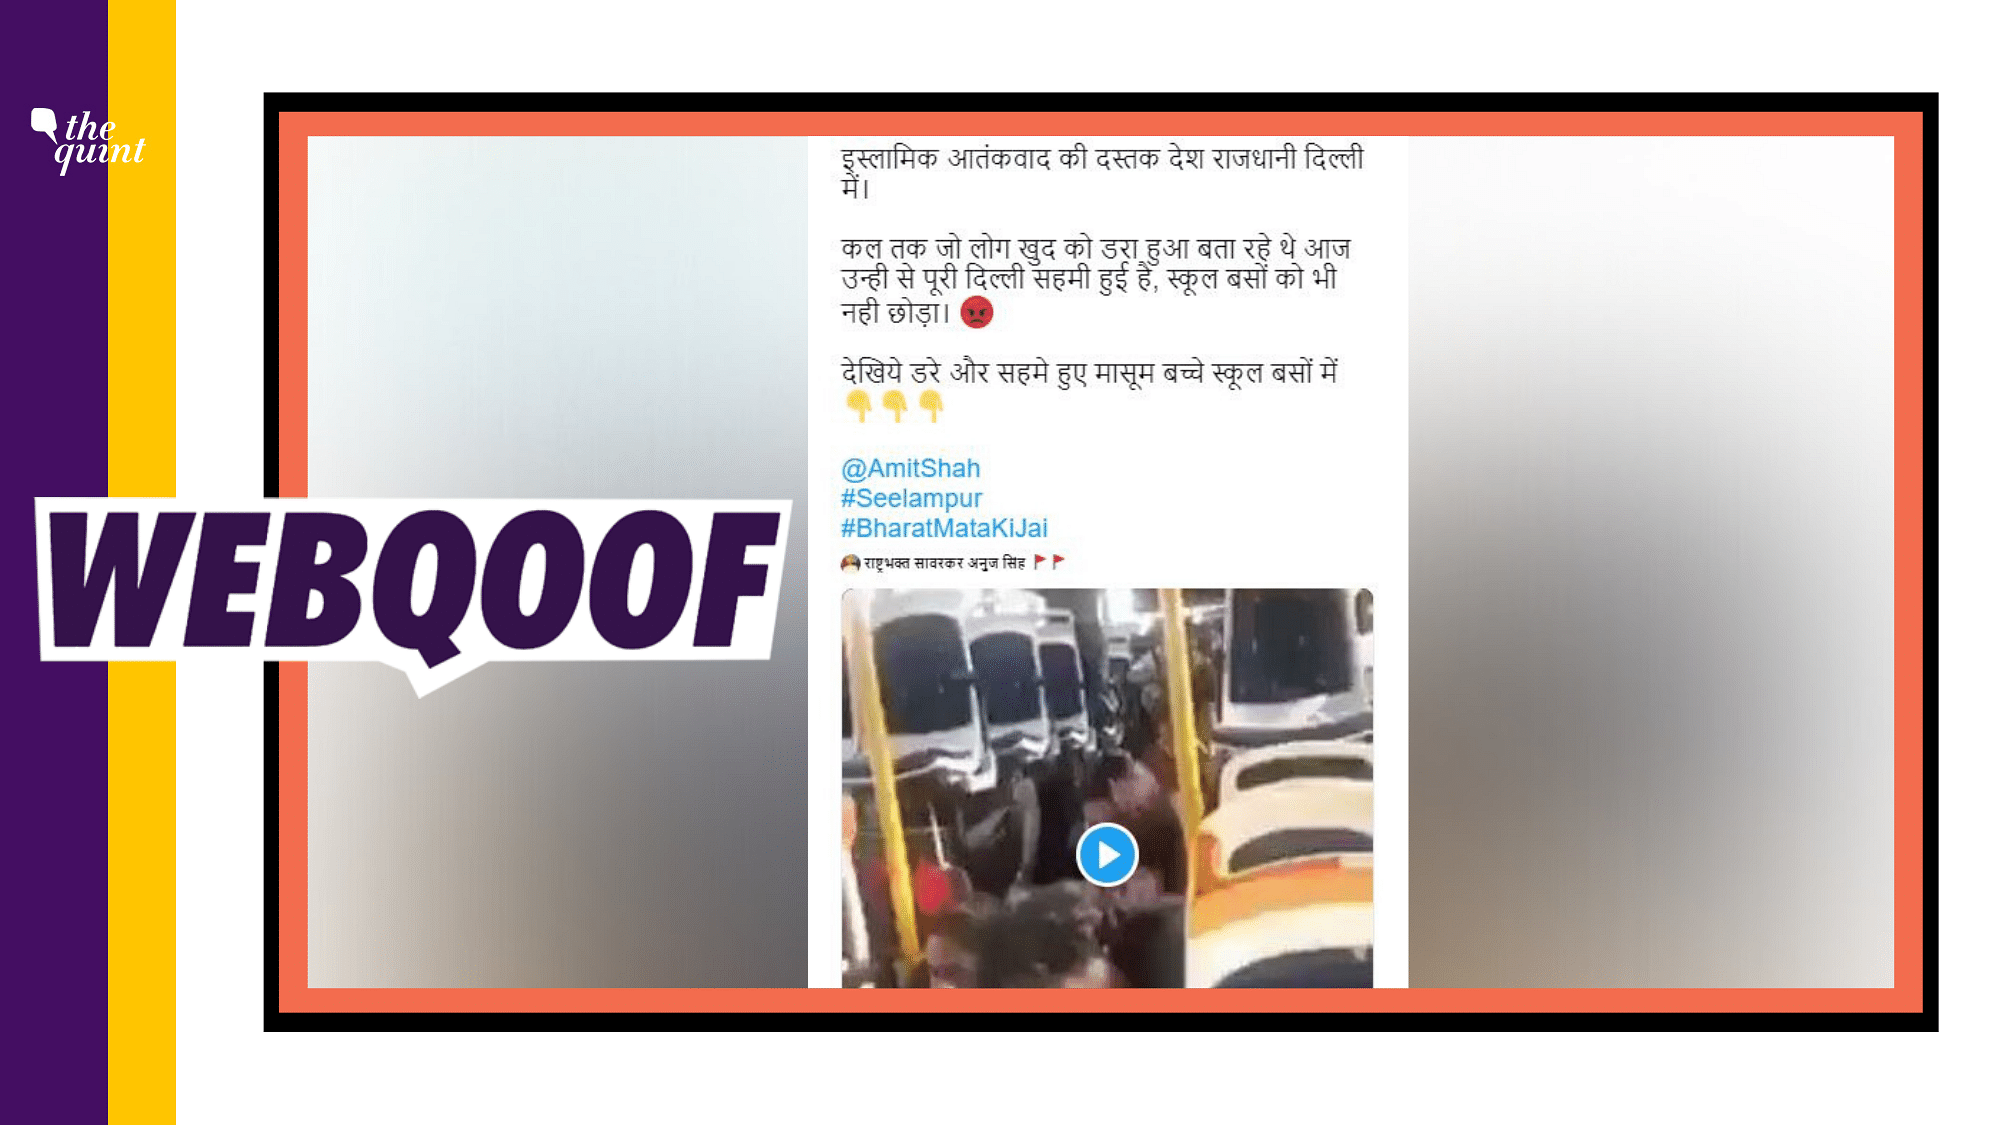 An old video is being circulated with a claim that angry protesters in Delhi’s Seelampur area vandalised a school bus.&nbsp;